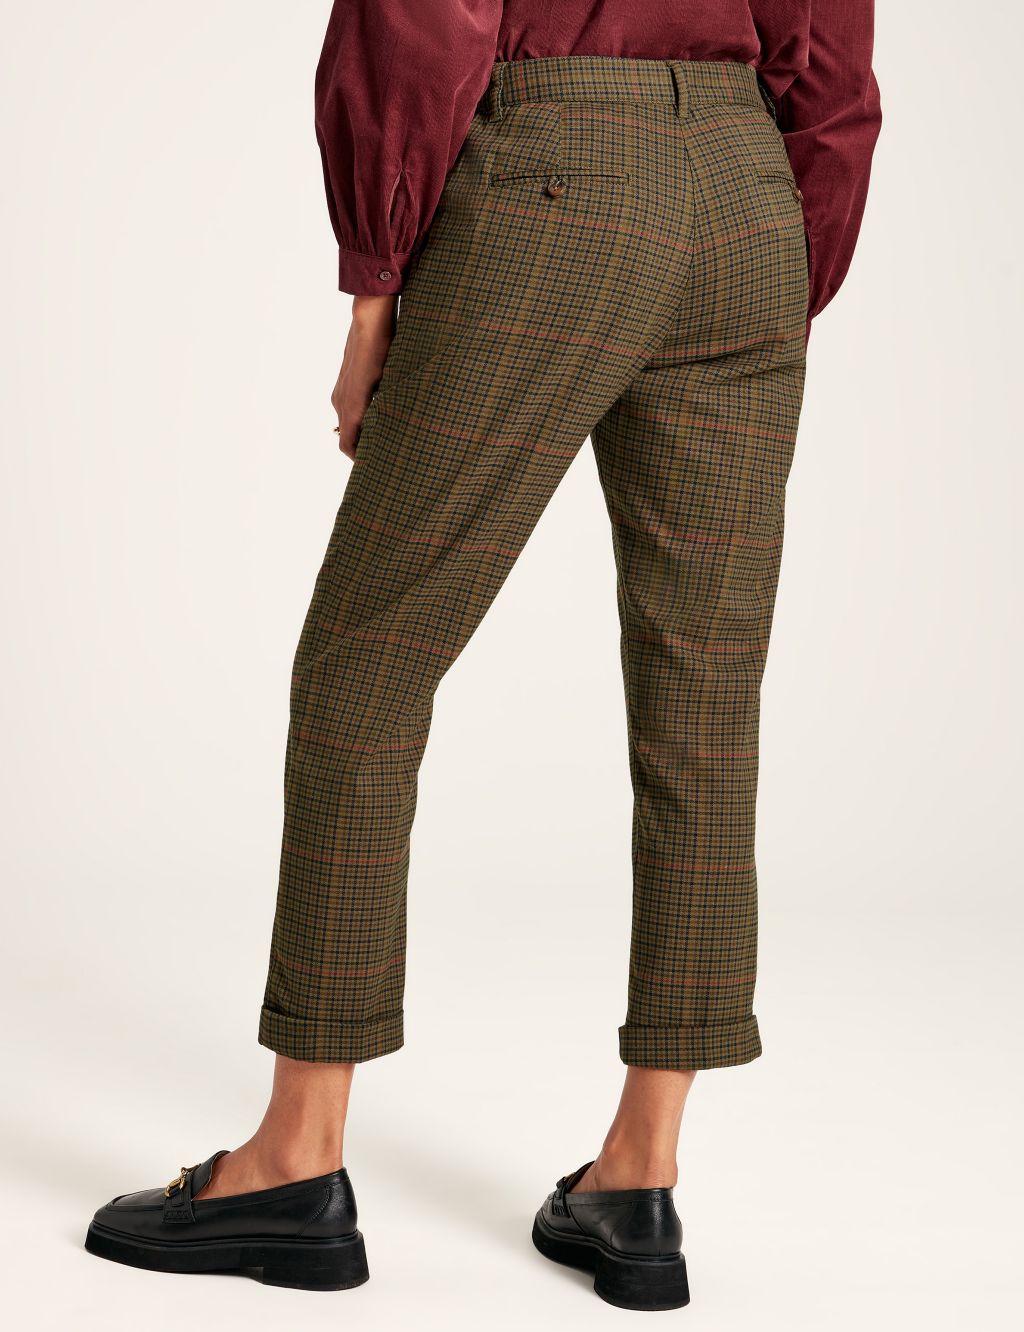 Wool Rich Checked Slim Fit Cropped Trousers image 4